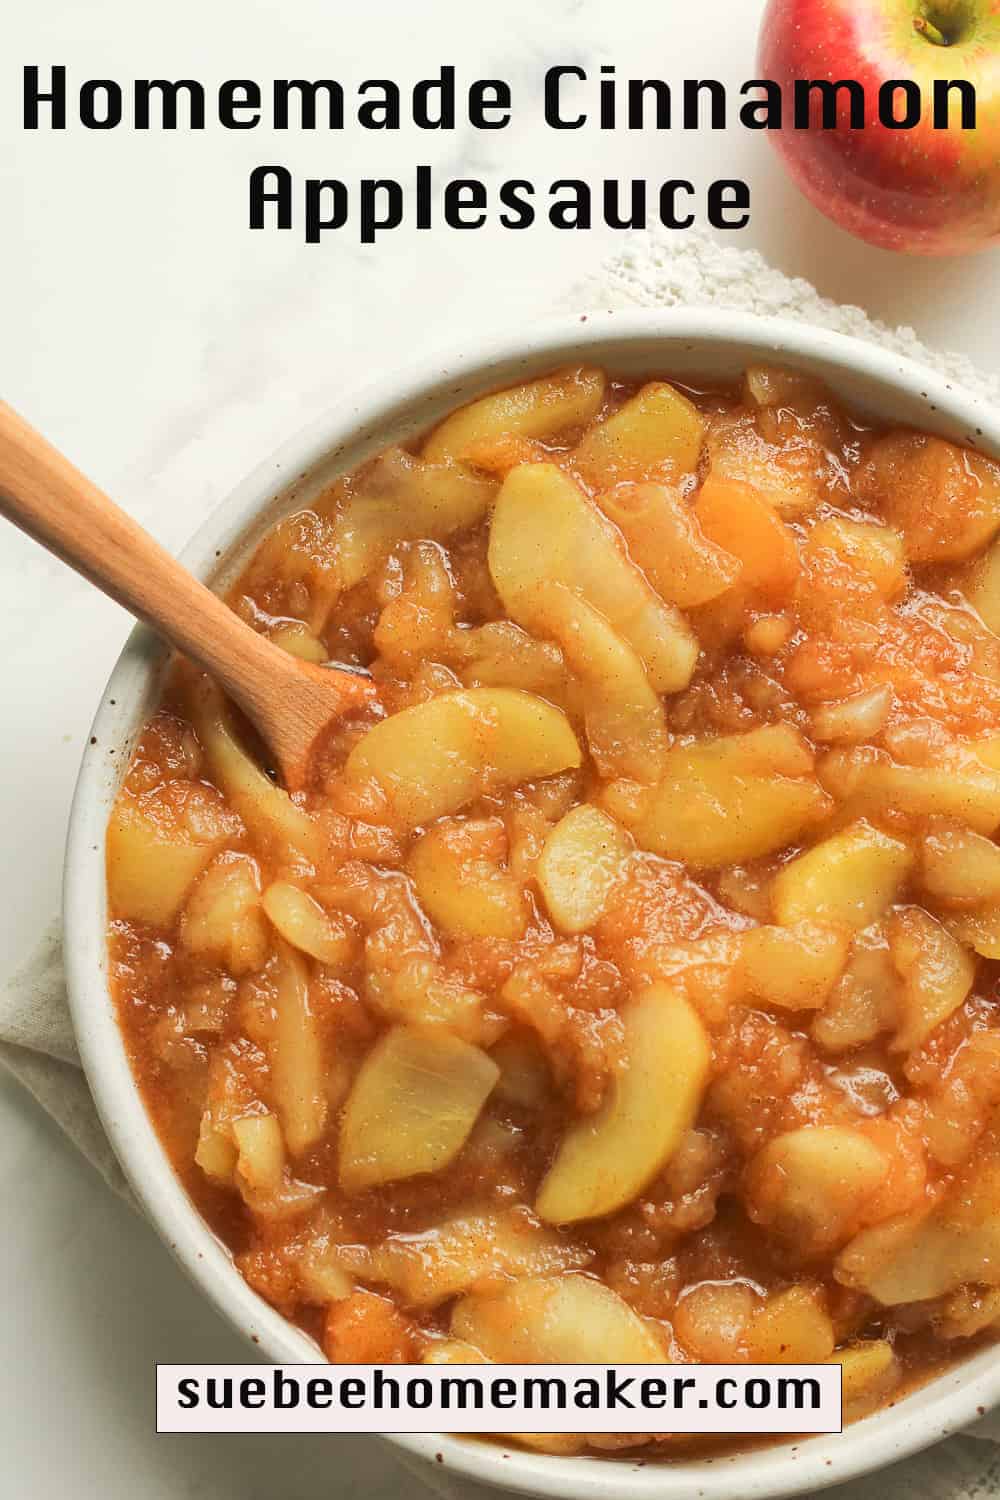 A bowl of homemade cinnamon applesauce with a wooden spoon.